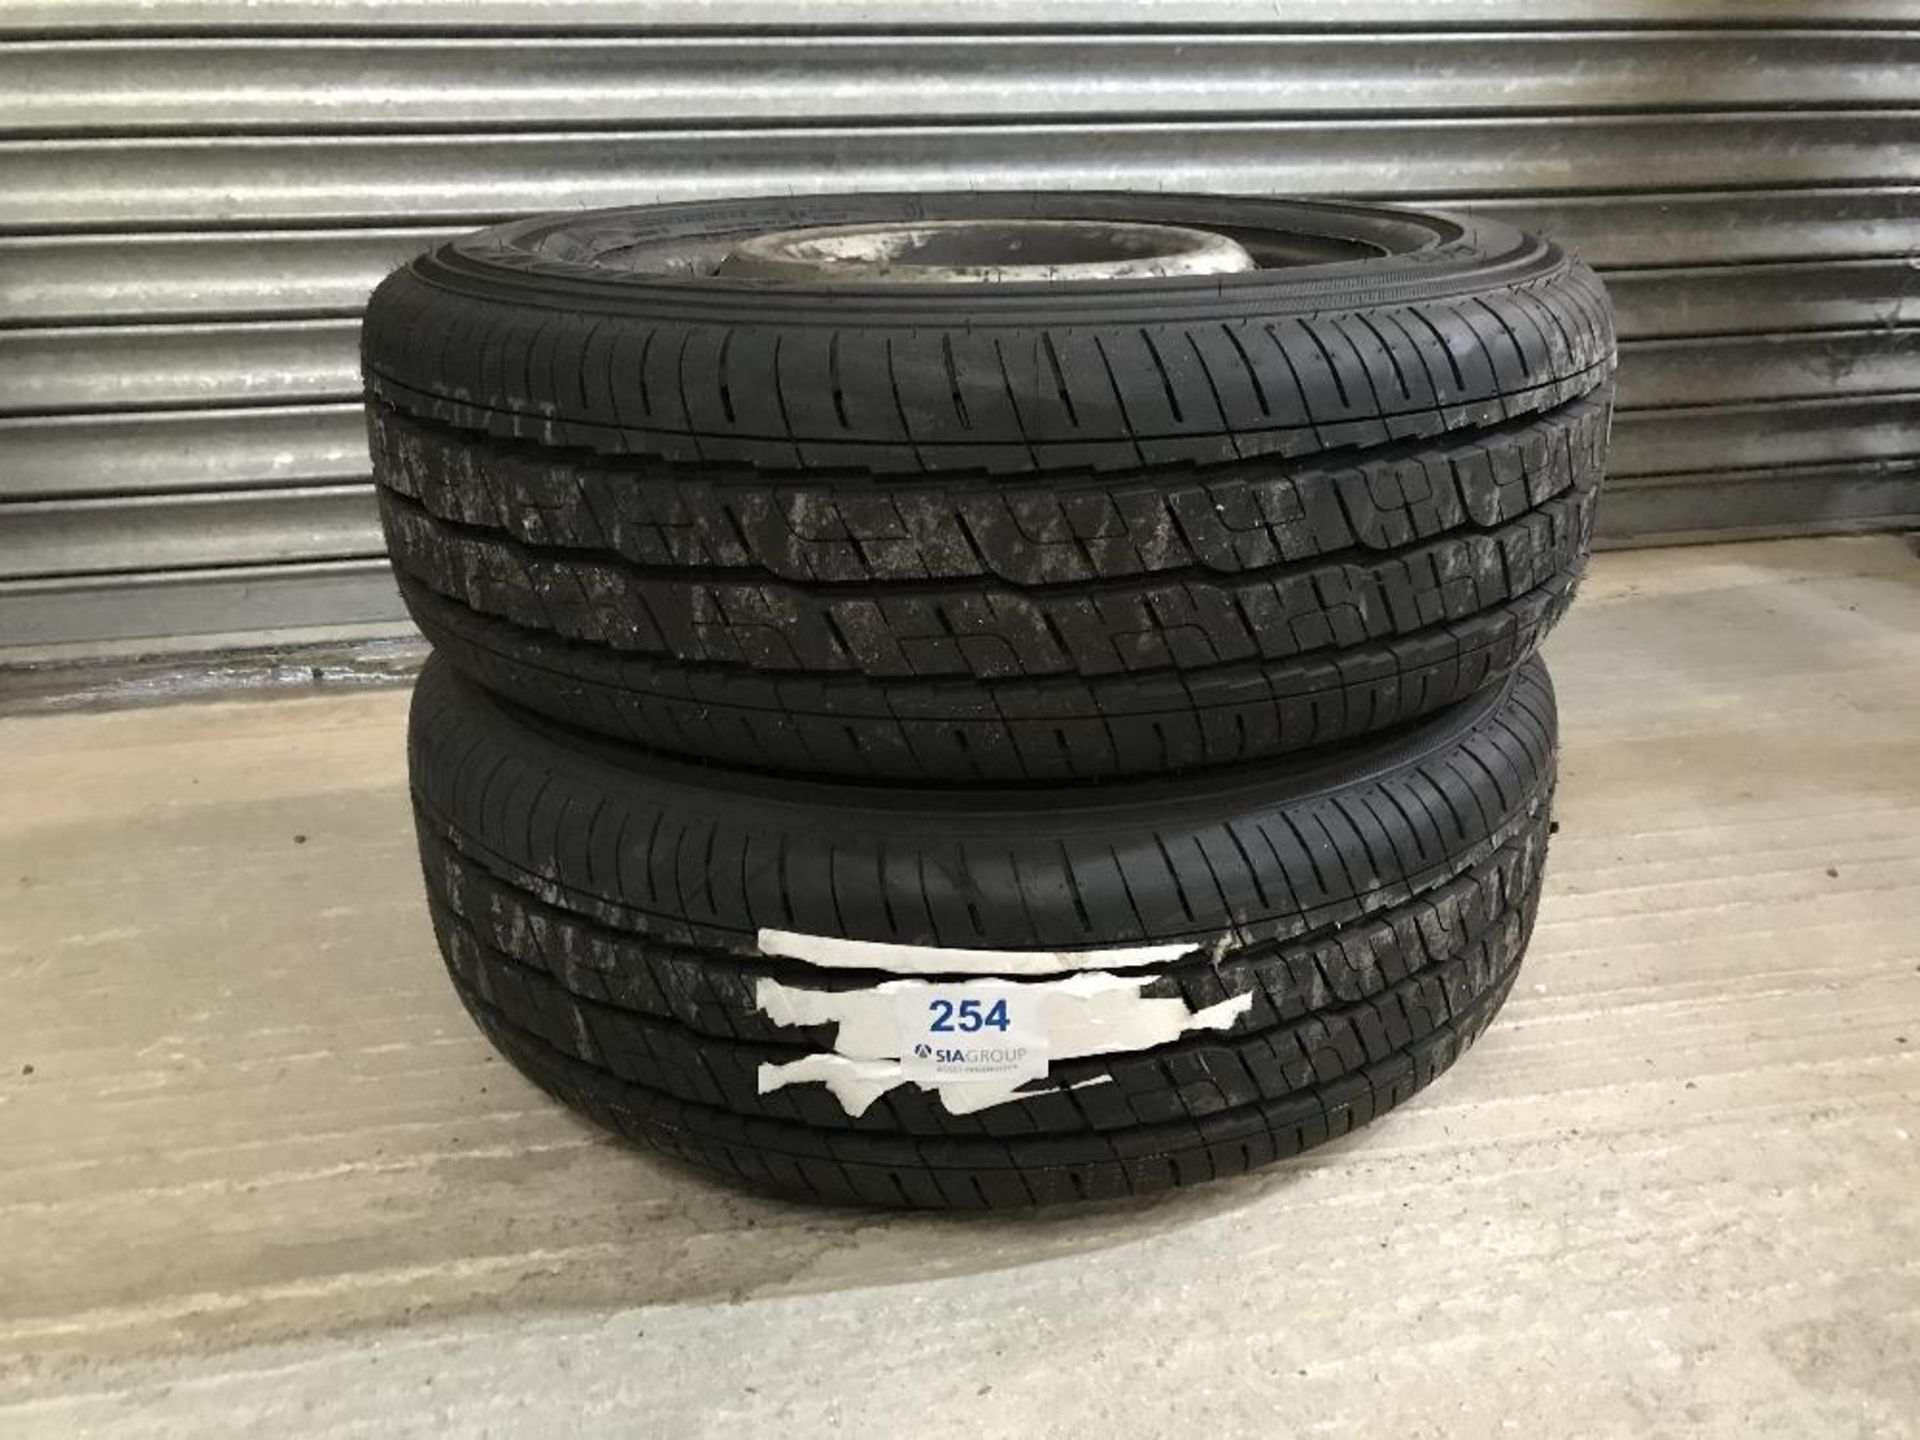 (2) 16 inch spare wheels with Avon 205/65/R16C tyres